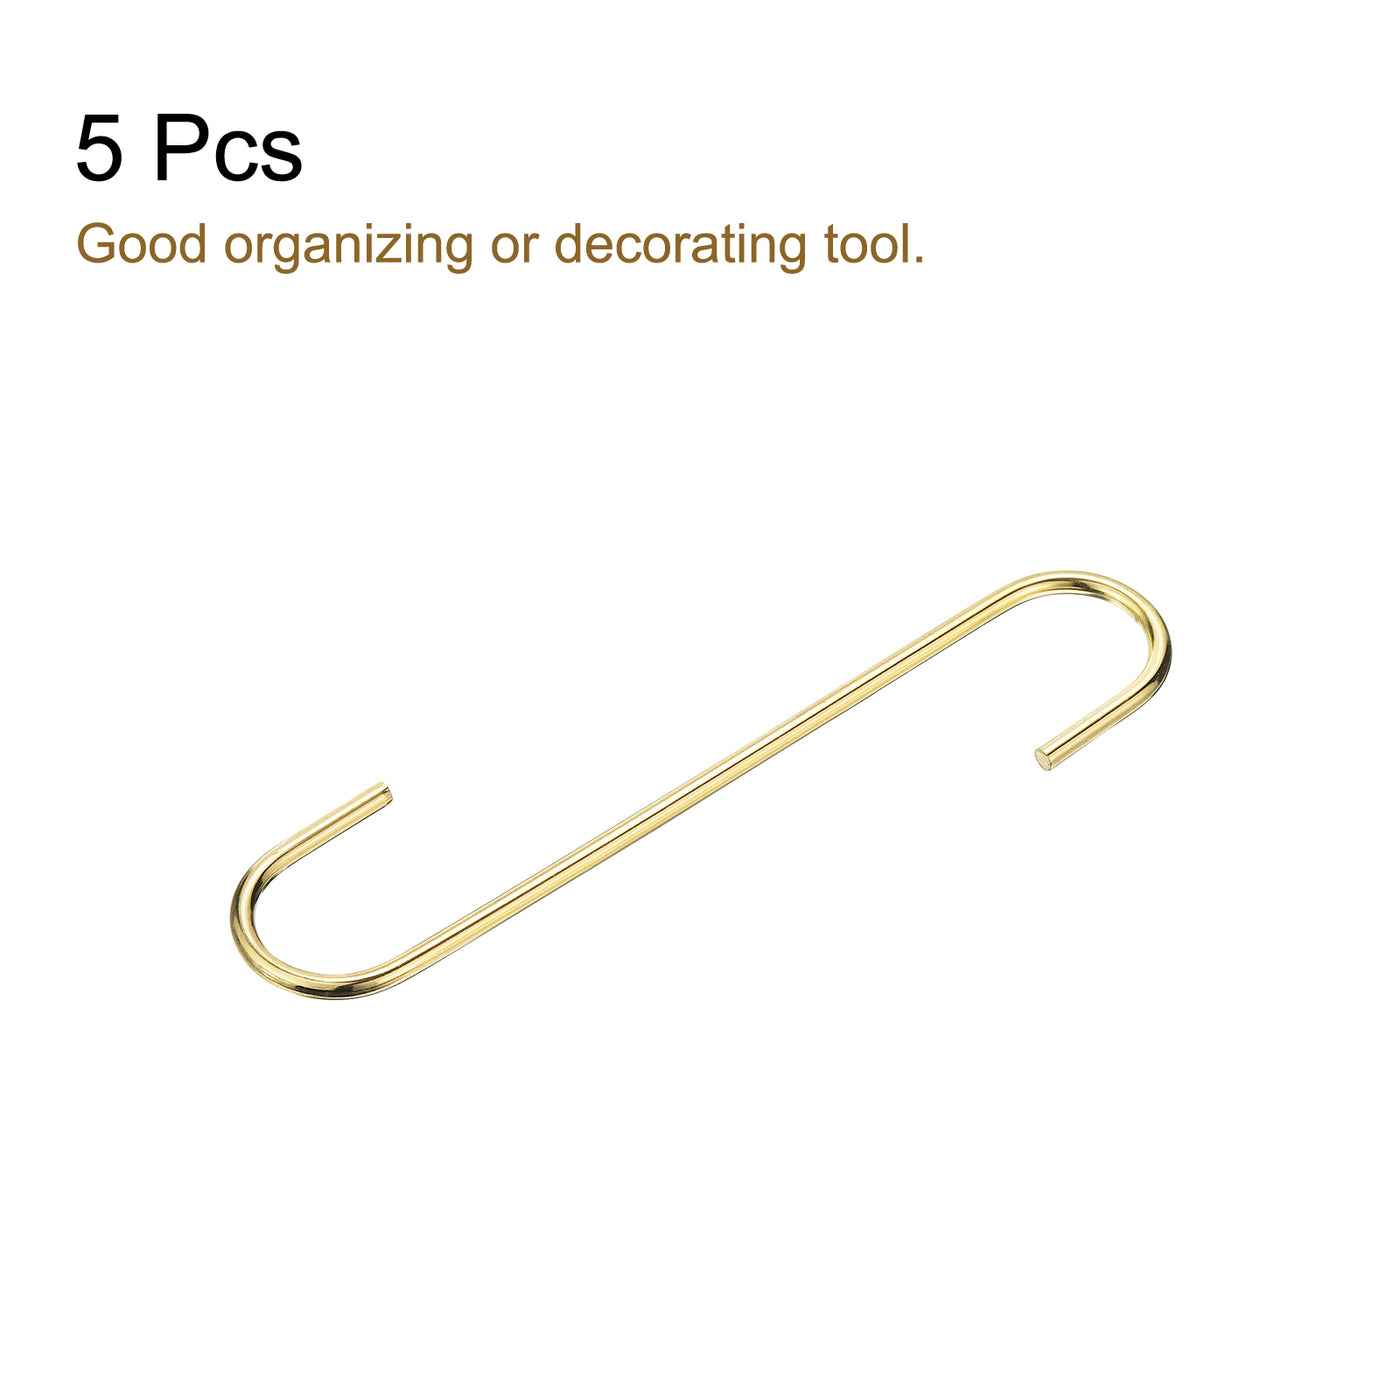 uxcell Uxcell S Hanging Hooks, 8inch(200mm) Extra Long Steel Hanger, Indoor Outdoor Uses for Garden, Bathroom, Closet, Workshop, Kitchen, Gold Tone, 5Pcs